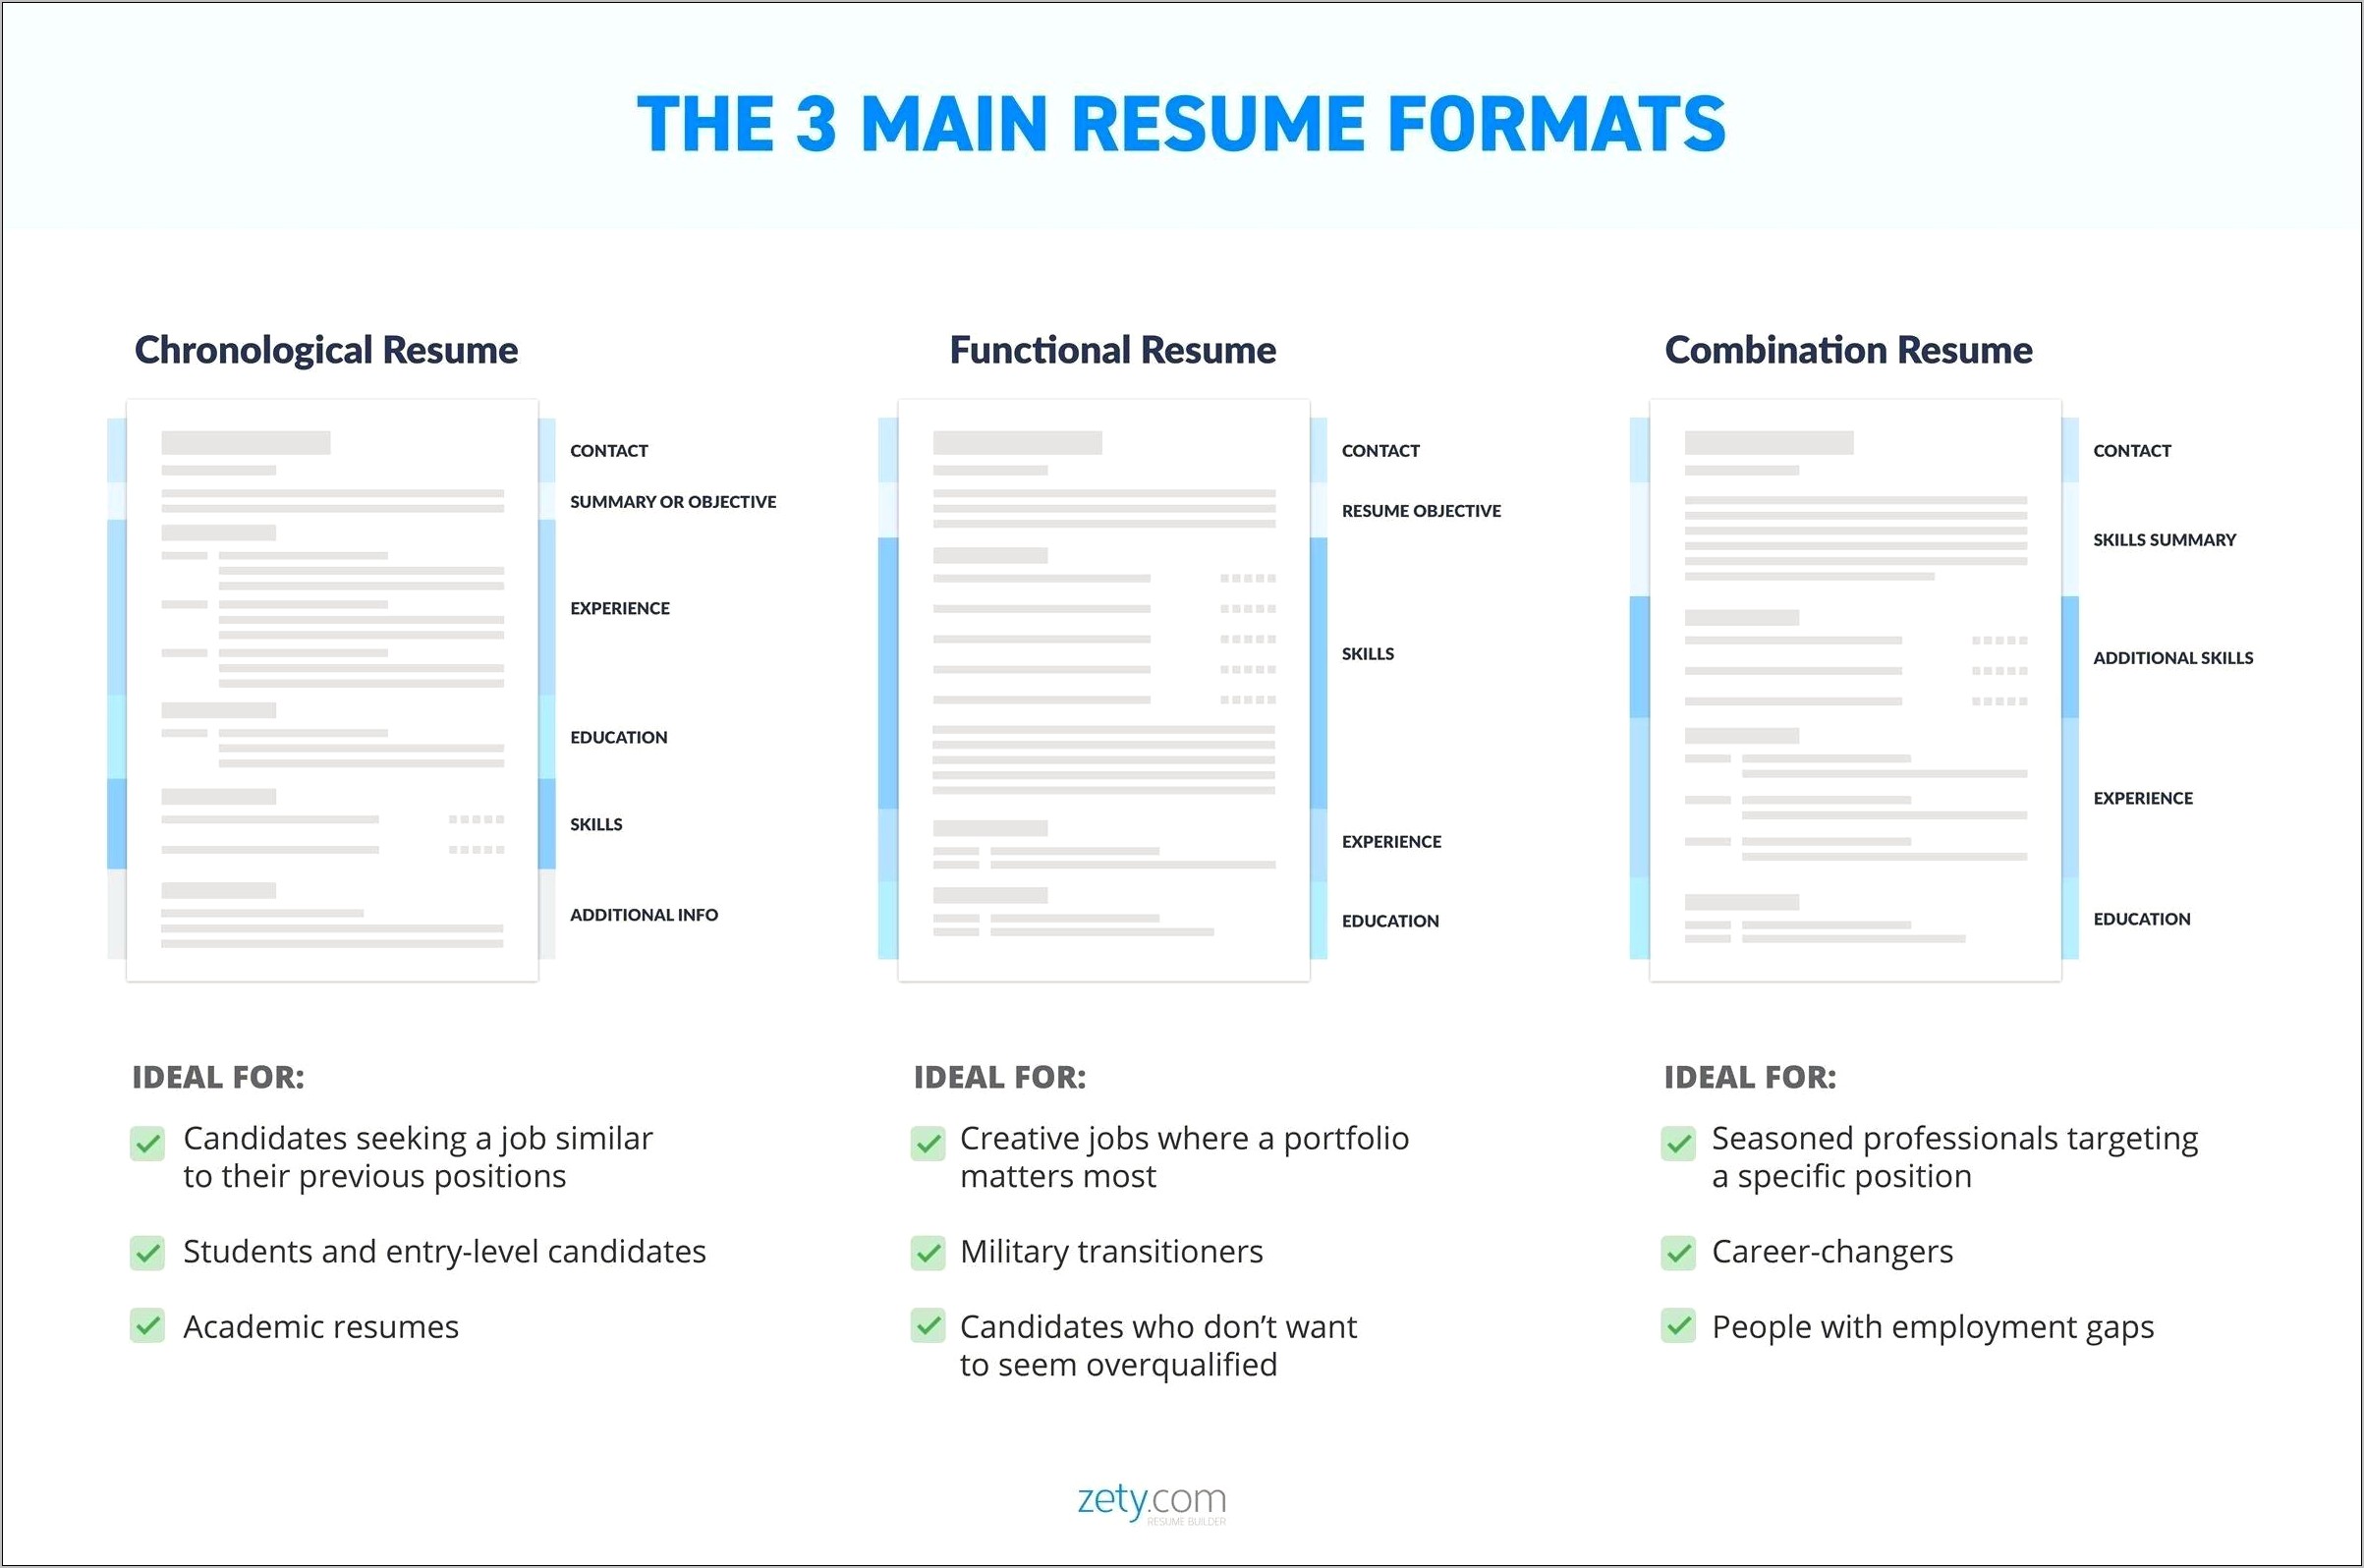 Select The Best Resume Type